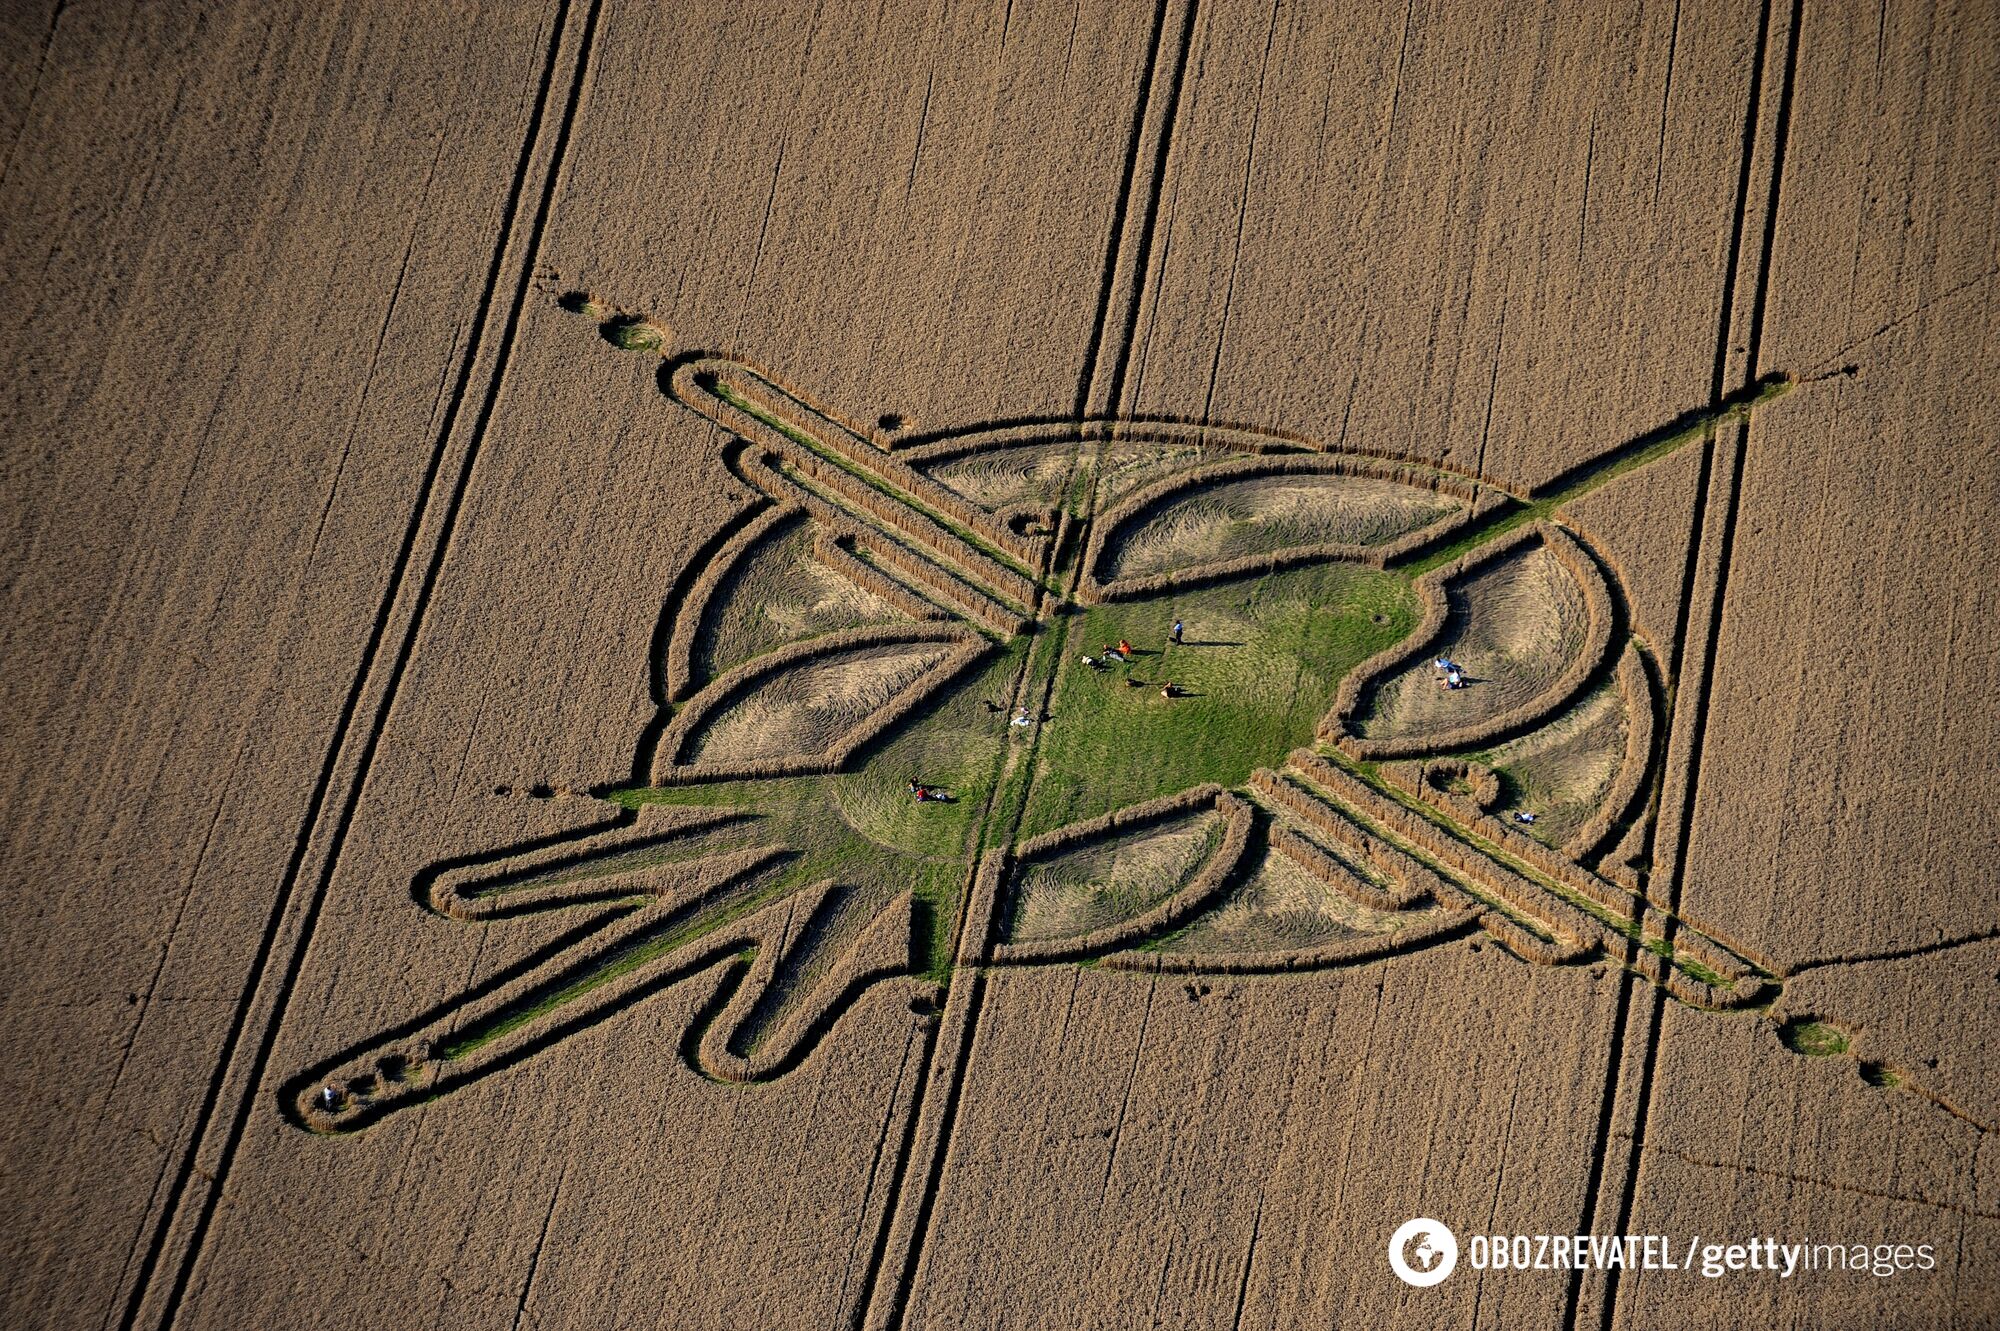 Crop circles in England in August 2009.